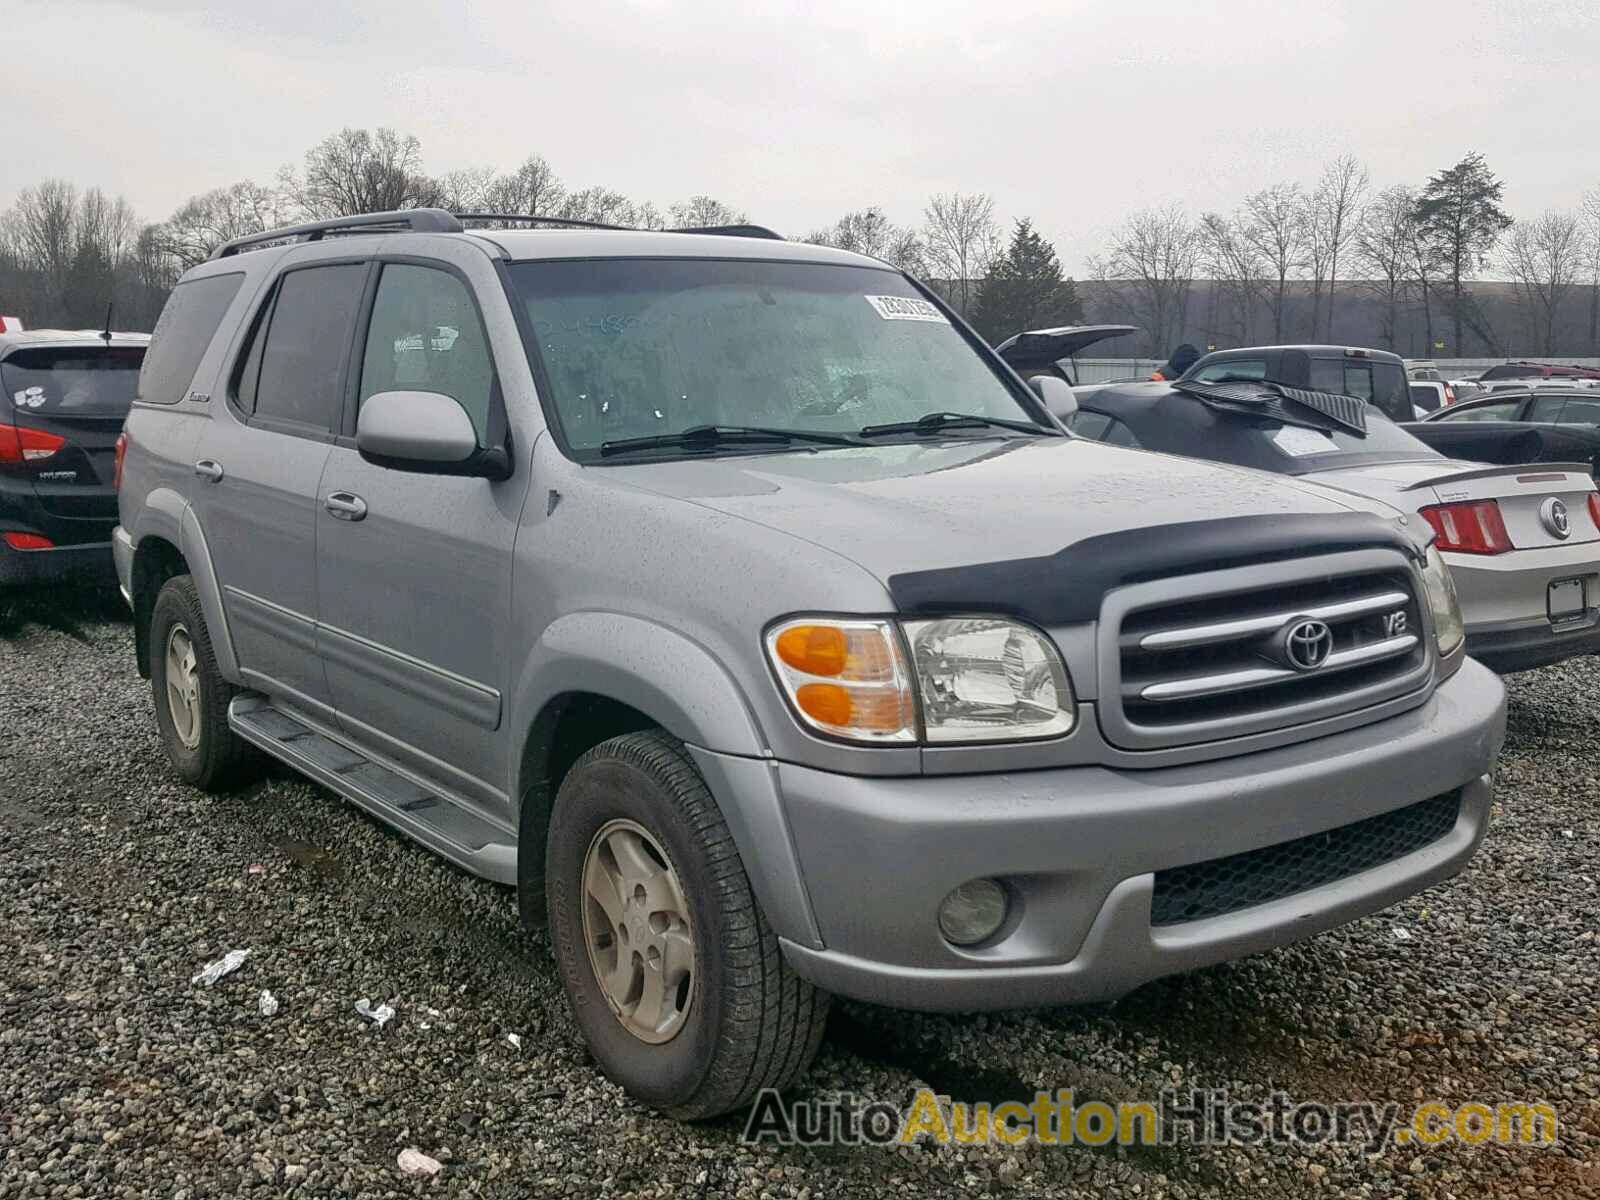 2002 TOYOTA SEQUOIA LIMITED, 